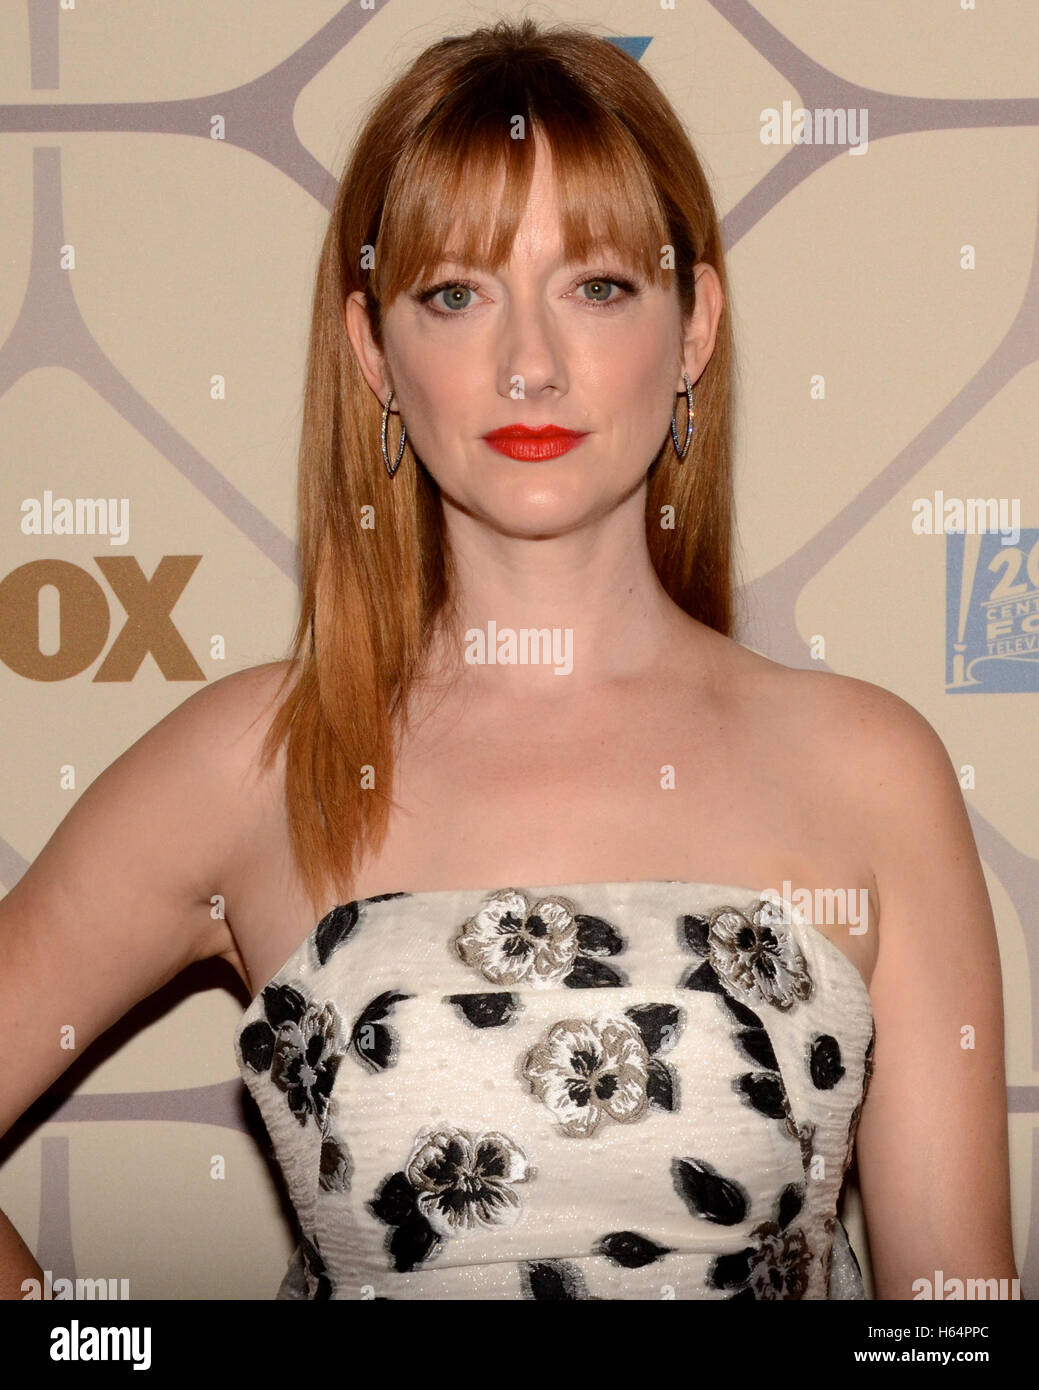 Judy Greer attends the 67th Primetime Emmy Awards Fox after party on September 20, 2015 in Los Angeles, California. Stock Photo